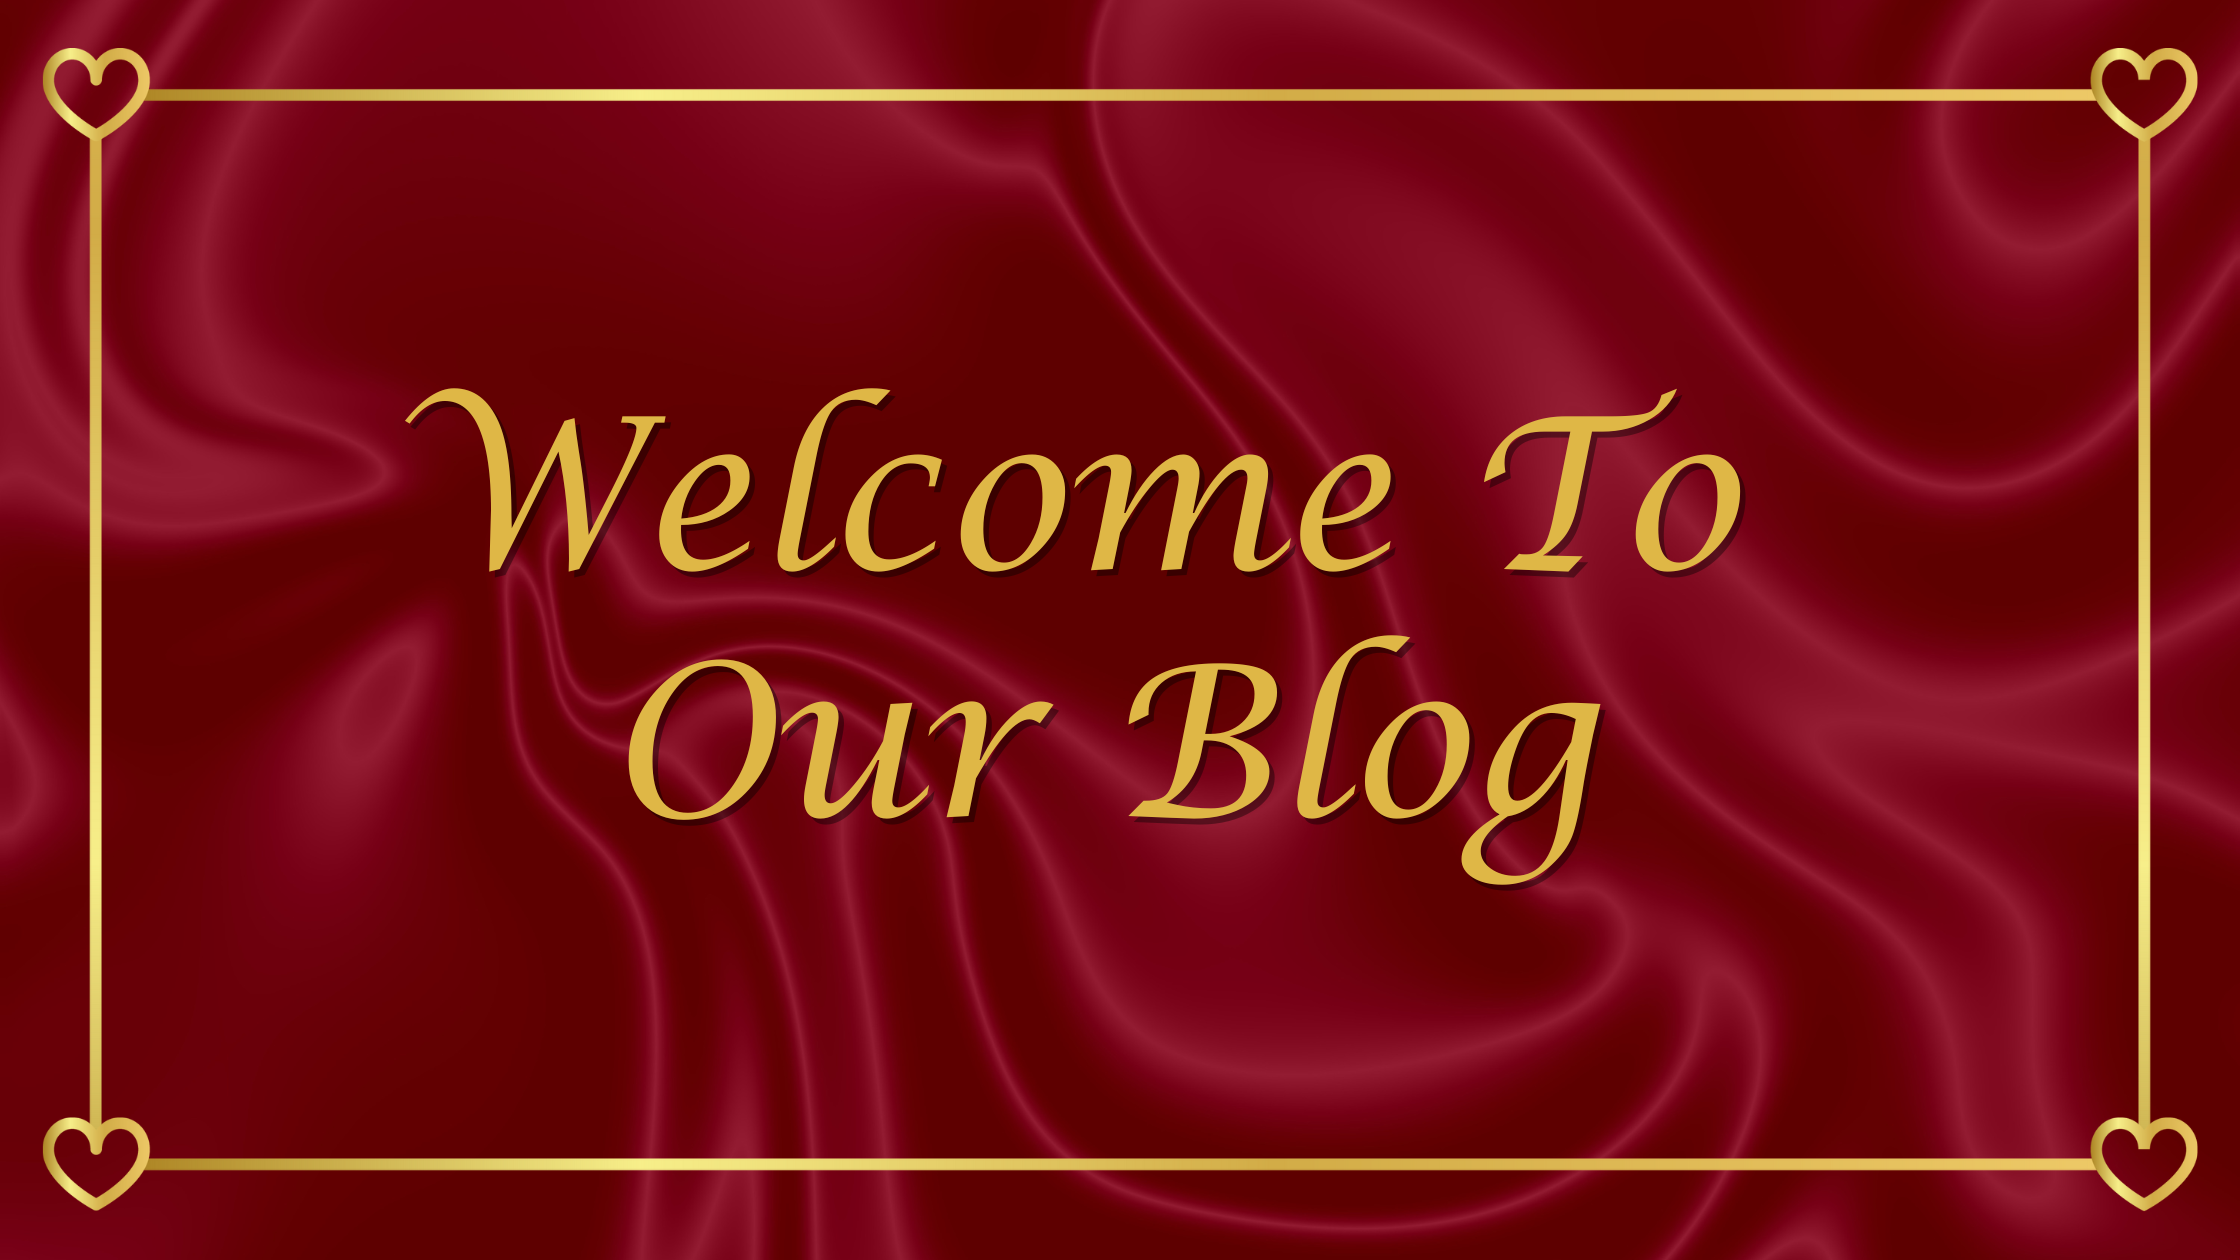 Welcome to our blog!